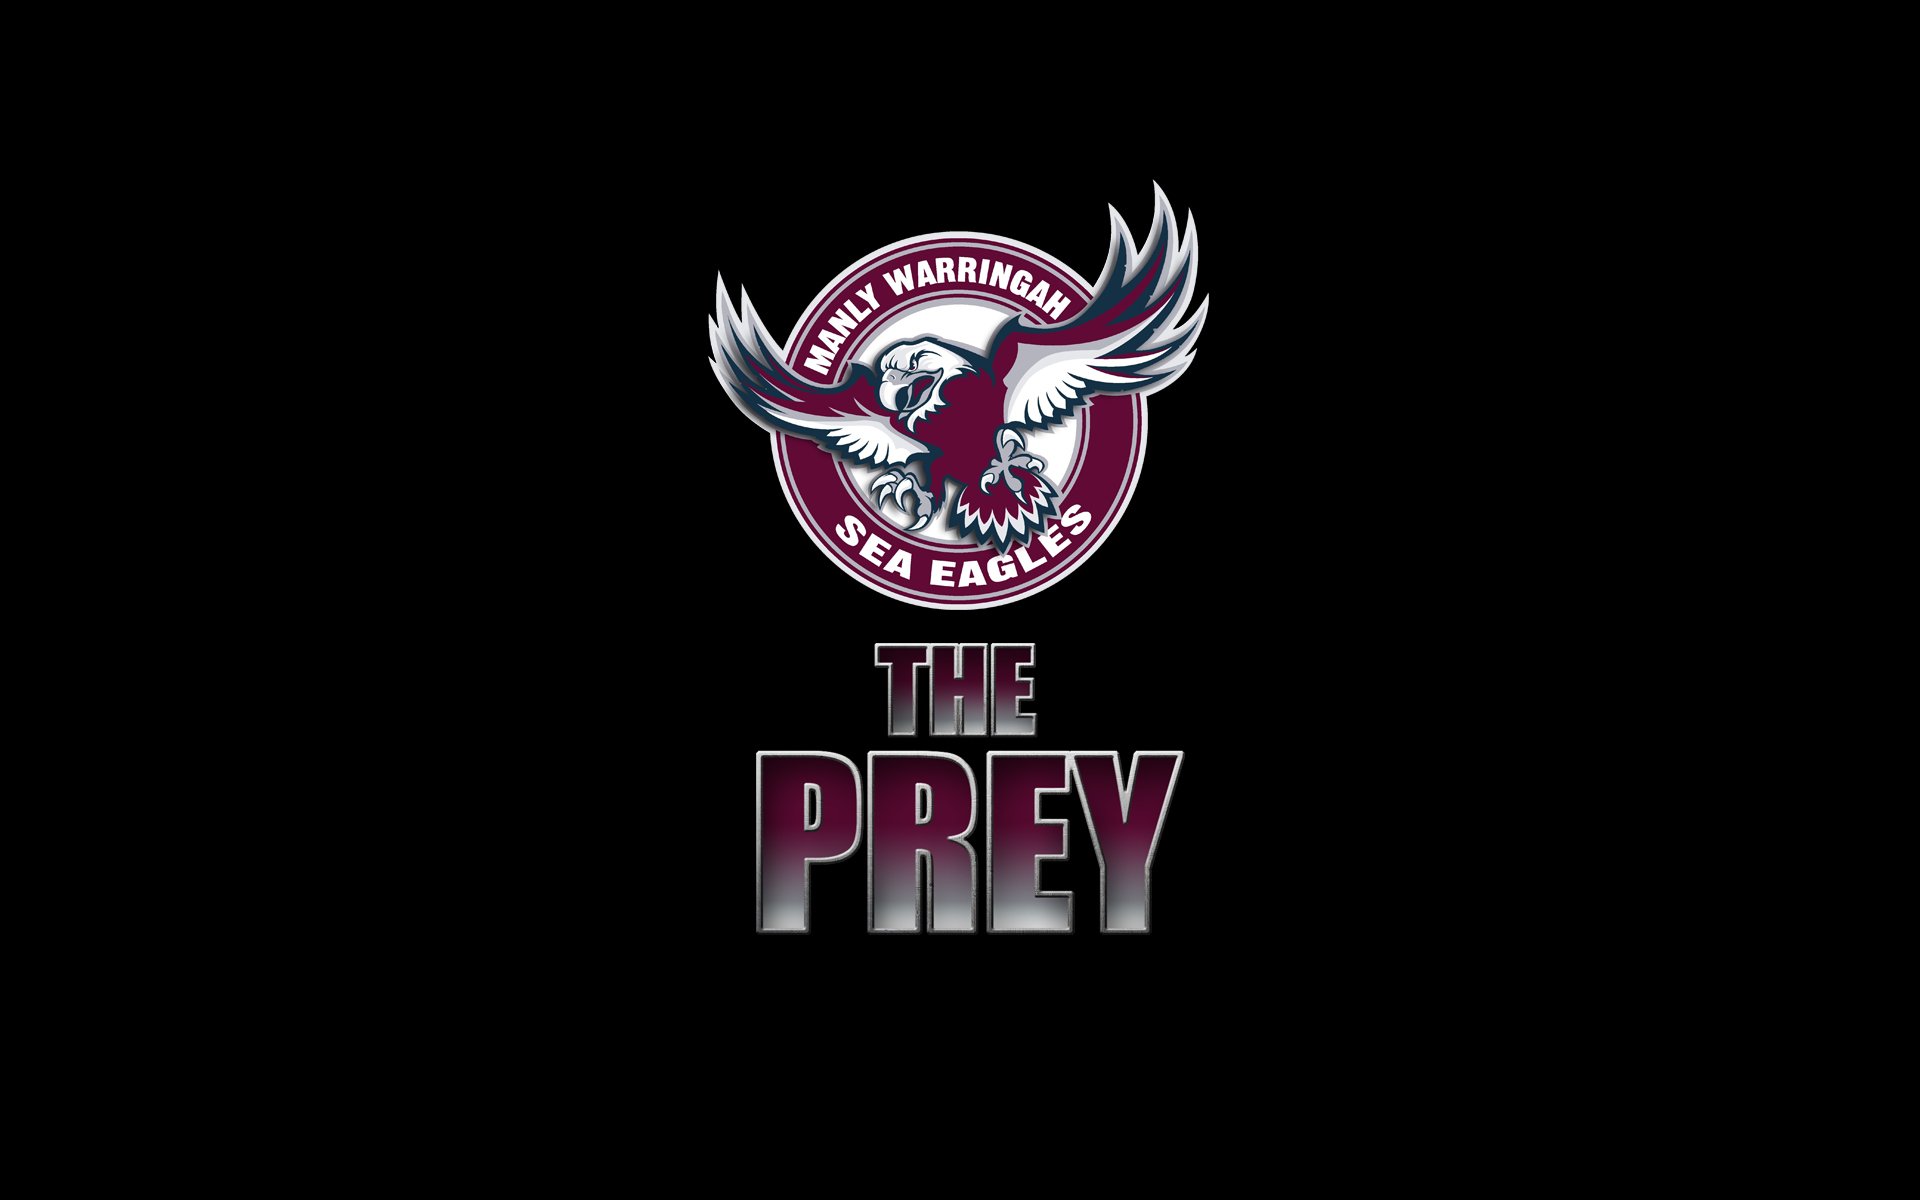 Manly Warringah Sea Eagles Wallpapers